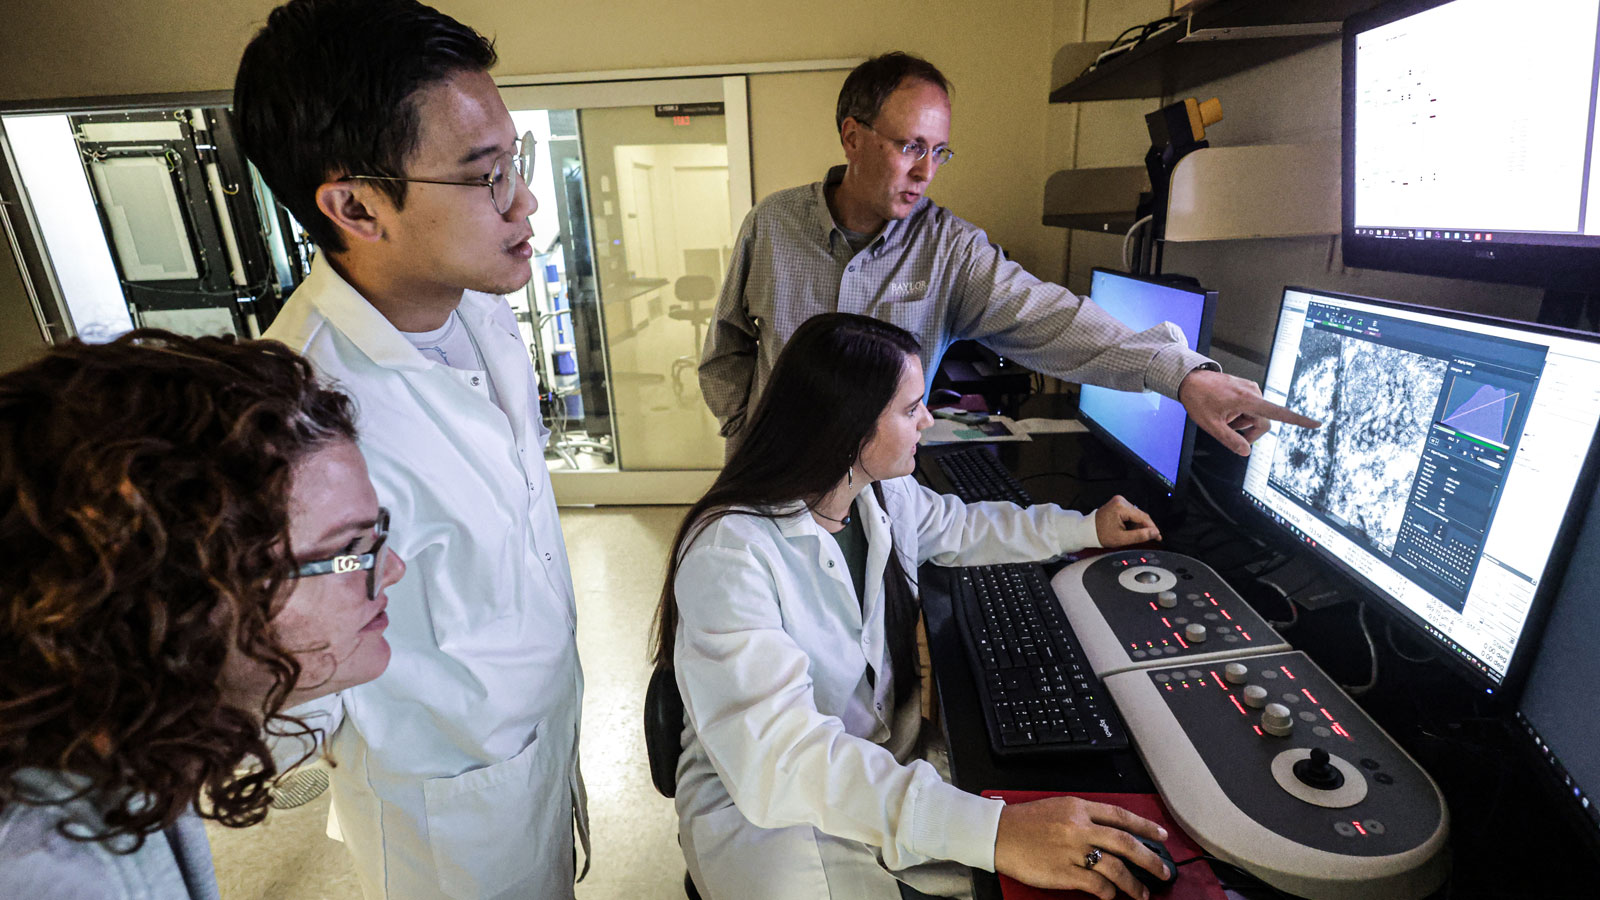 Dr. Bernd Zechmann works with faculty and students to operate Baylor's new transmission electron microscope.